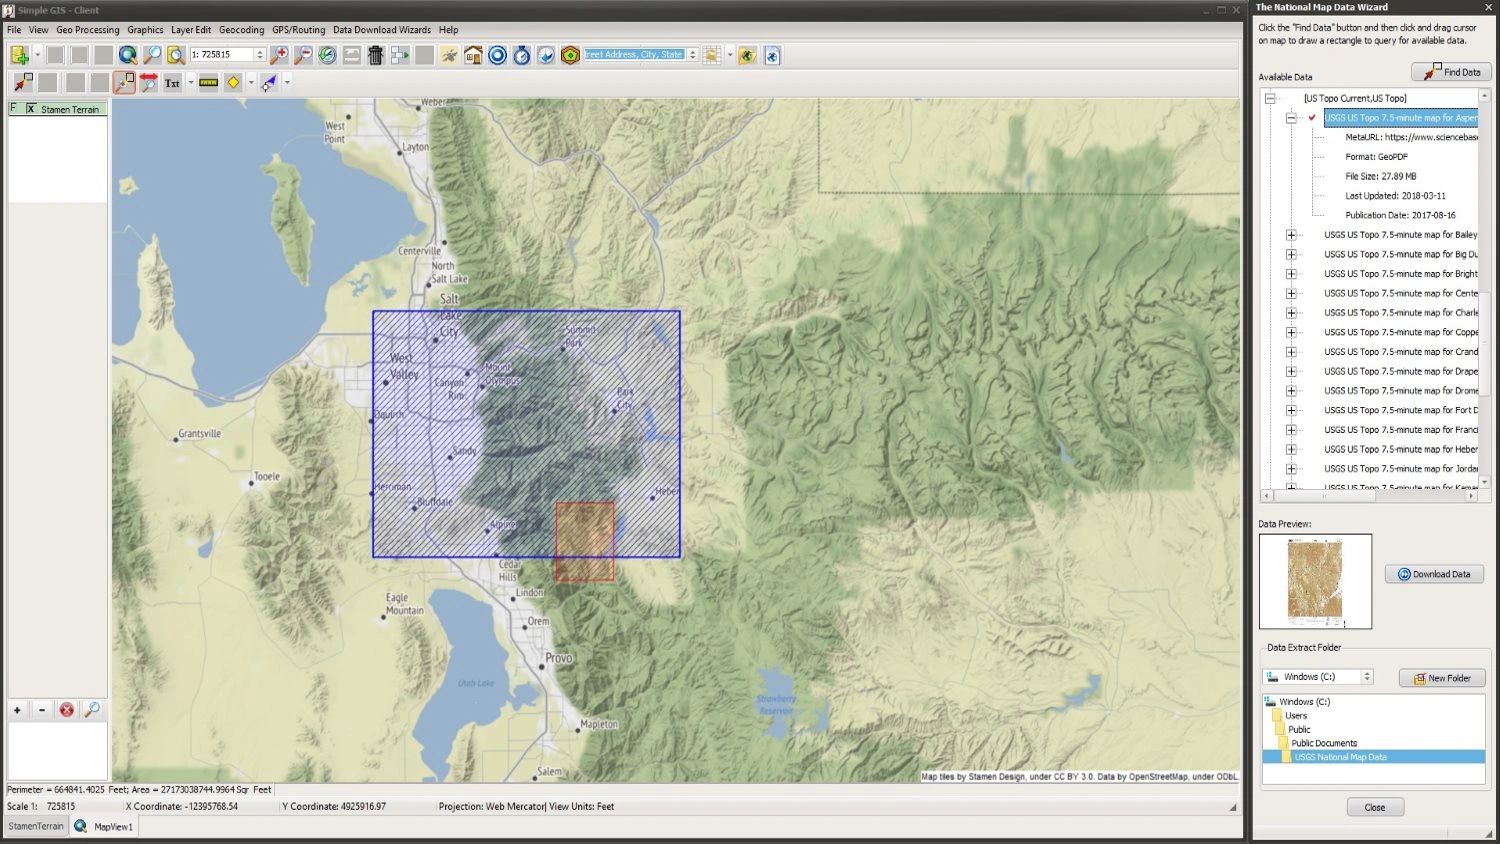 USGS Data Wizard in Simple GIS Client